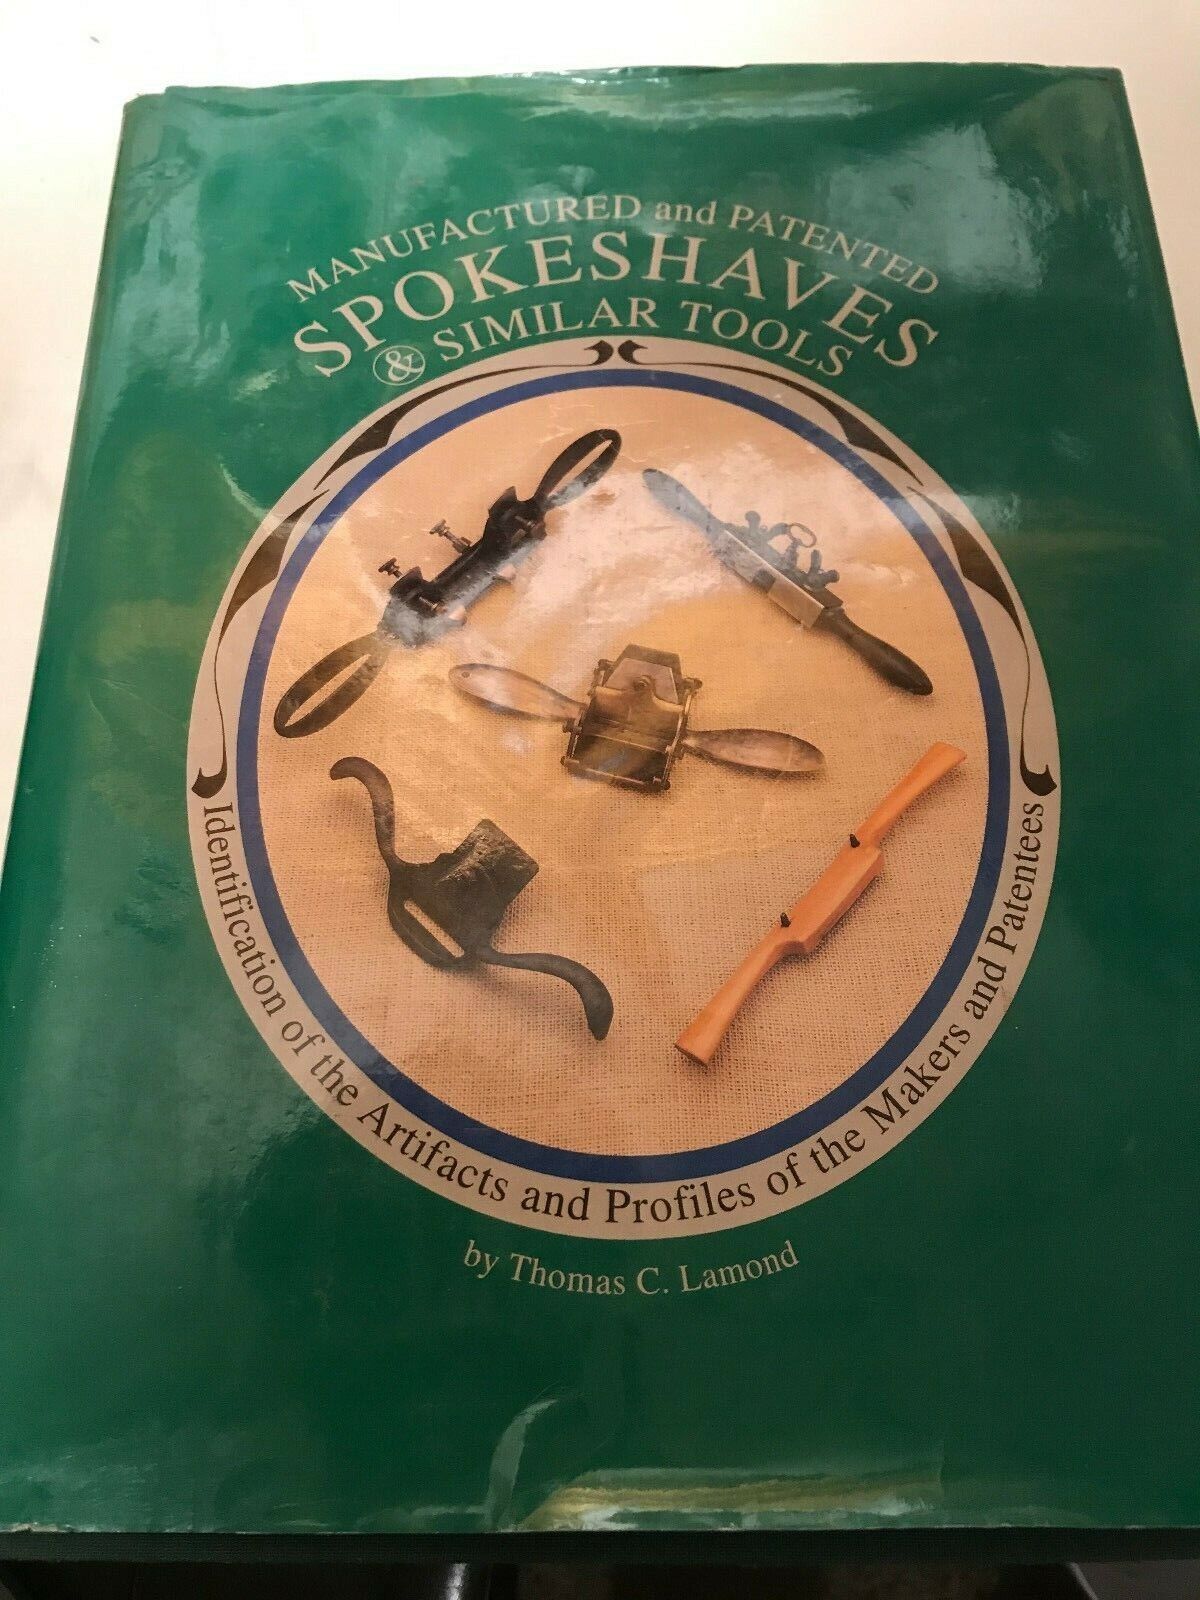 MANUFACTURED & PATENTED SPOKESHAVES & SIMILAR TOOLS HARD COVER BOOK